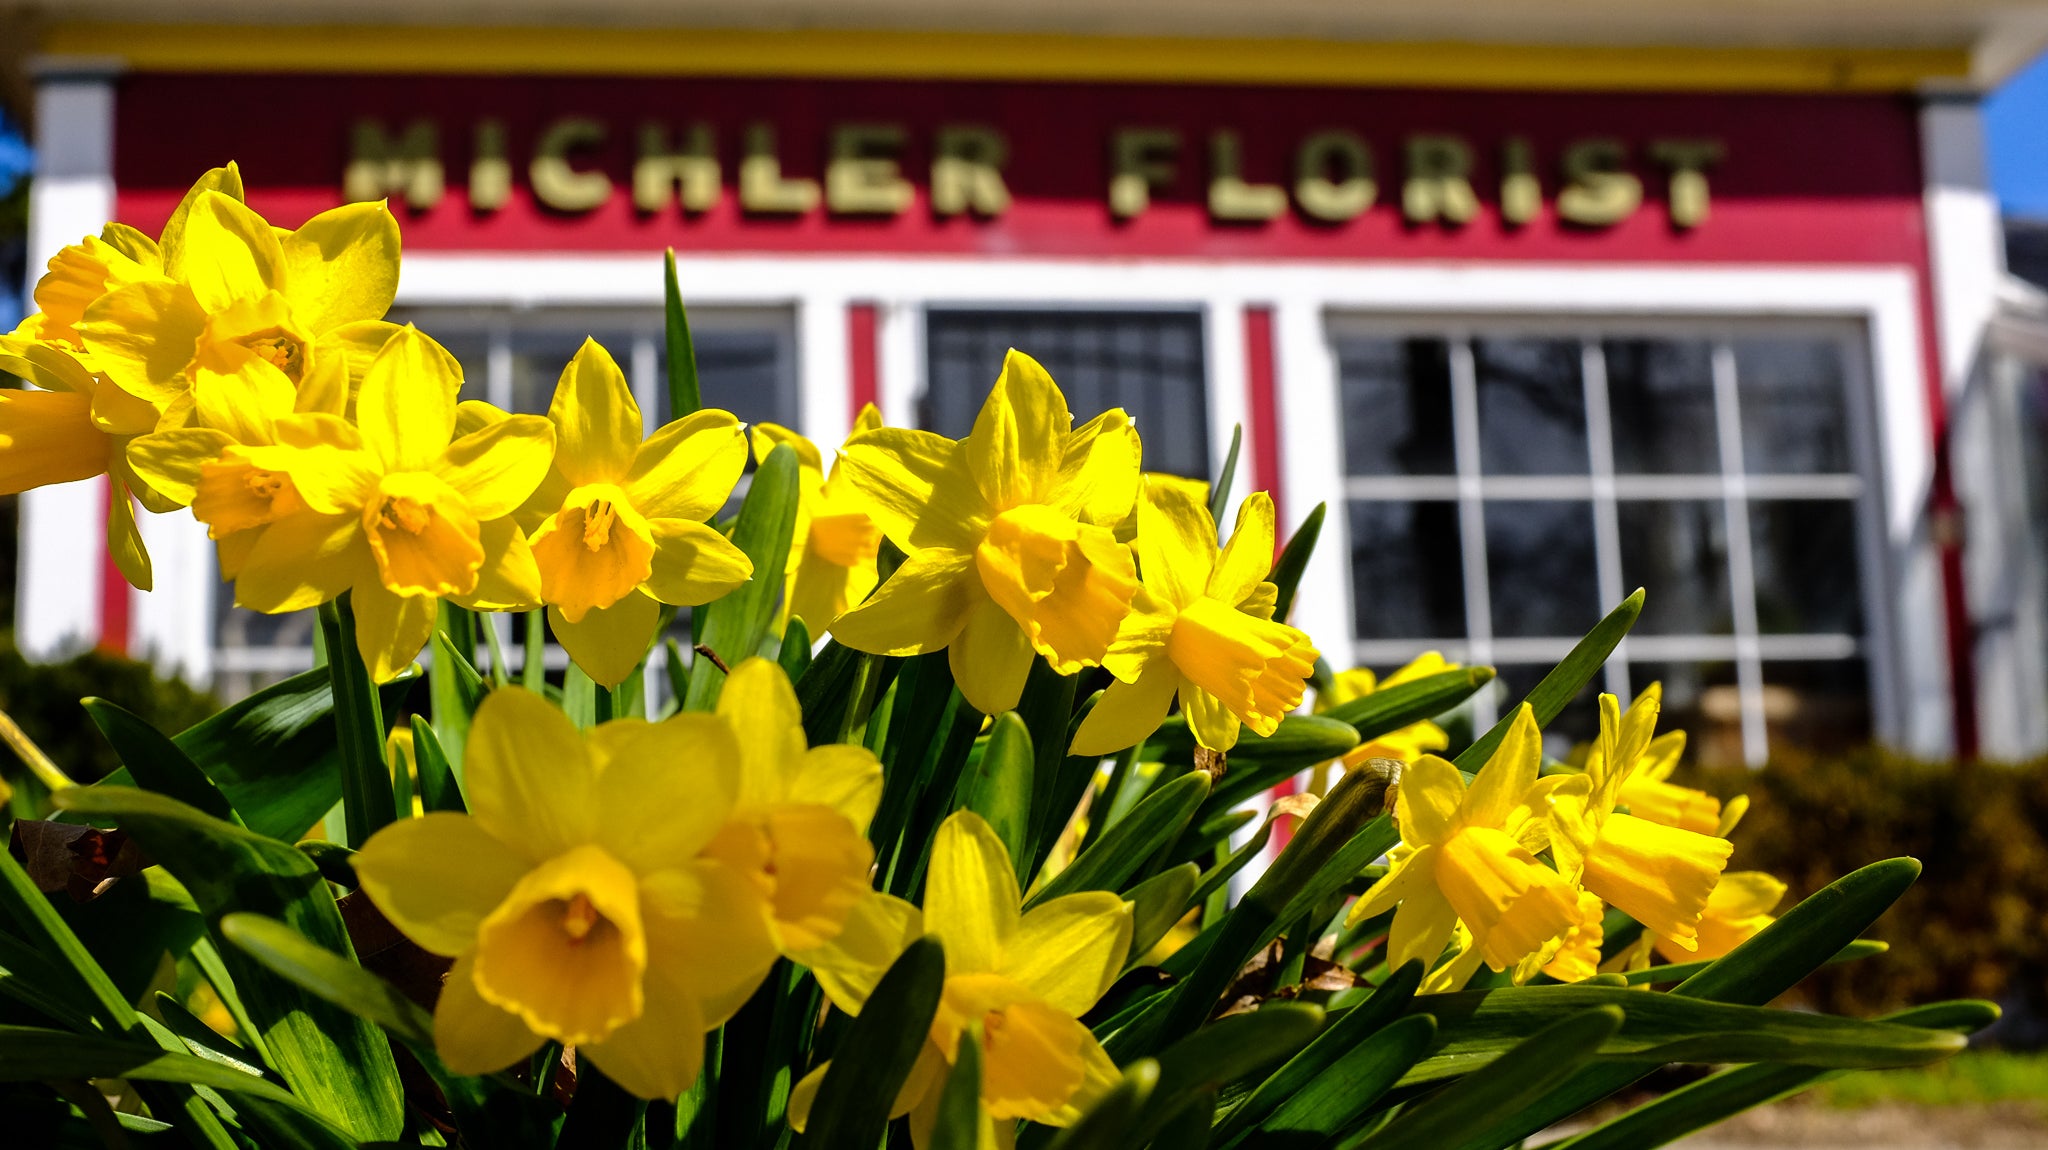 Tete-a-Tete Daffodils in Bloom at Michler's Florist